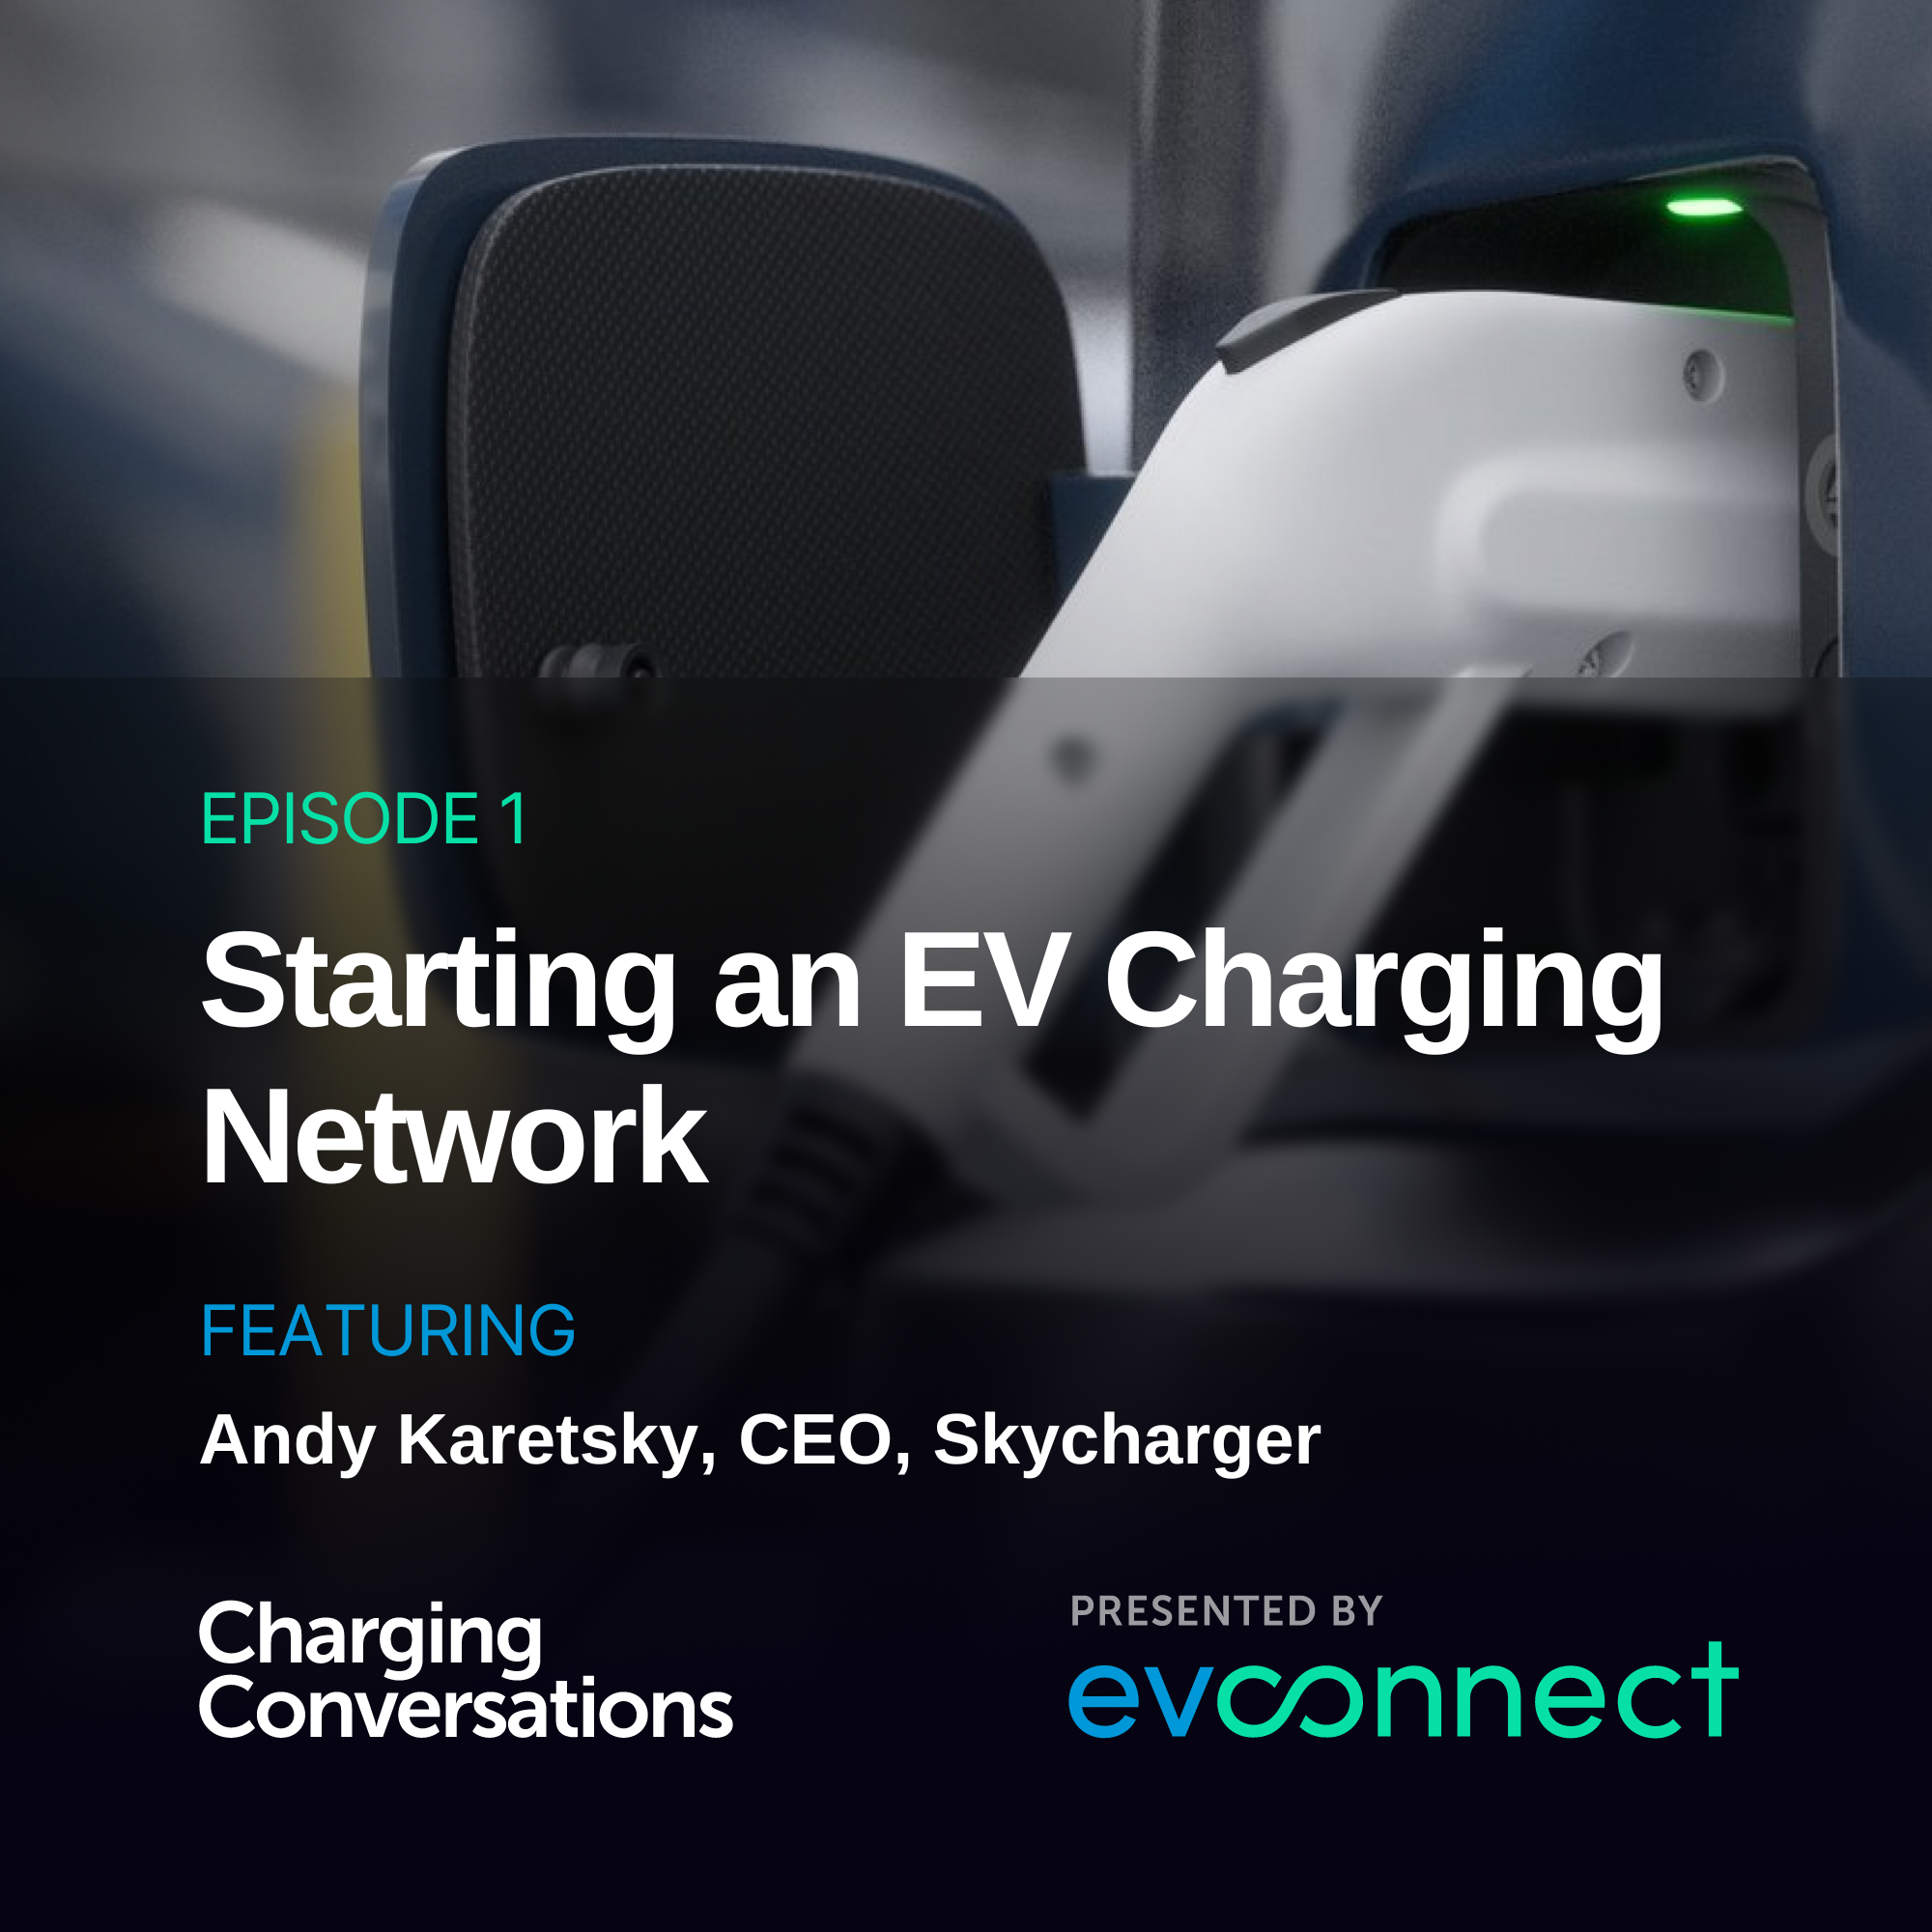 Starting an EV Charging Network: Andy Karetsky, CEO, Skycharger